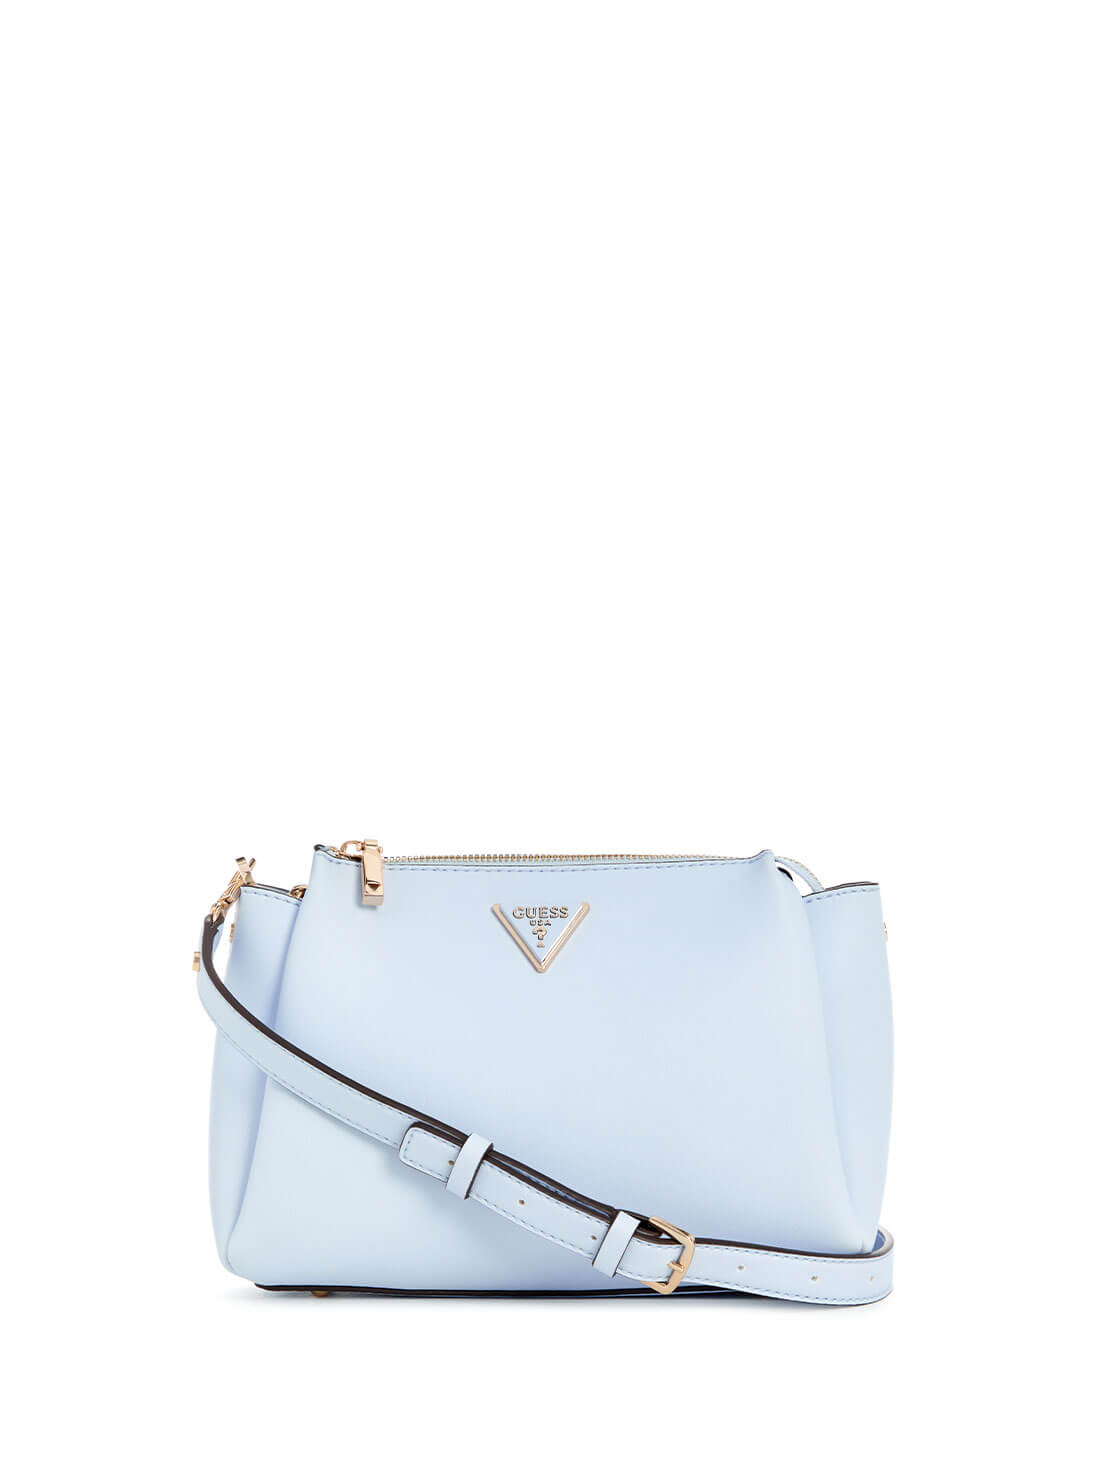 GUESS Sky Blue Iwona Crossbody Bag front view